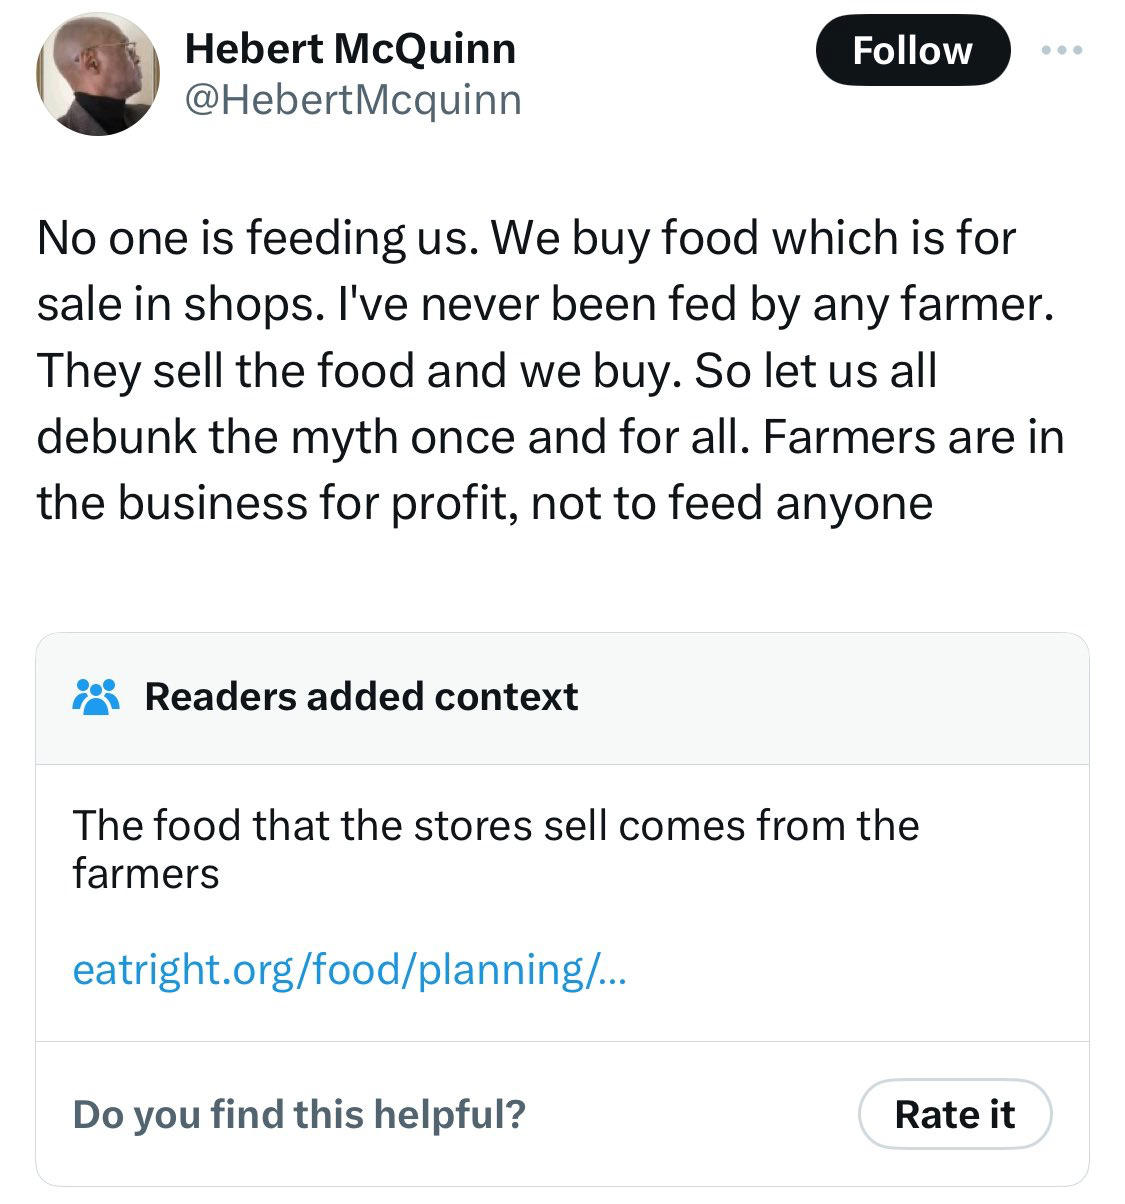 A tweet reading “No one is feeding us. We buy food which is for sale in shops. I've never been fed by any farmer. They sell the food and we buy. So let us all debunk the myth once and for all. Farmers are in the business for profit, not to feed anyone” with a Community Note that says “Readers added context. The food that the stores sell comes from the farmers”